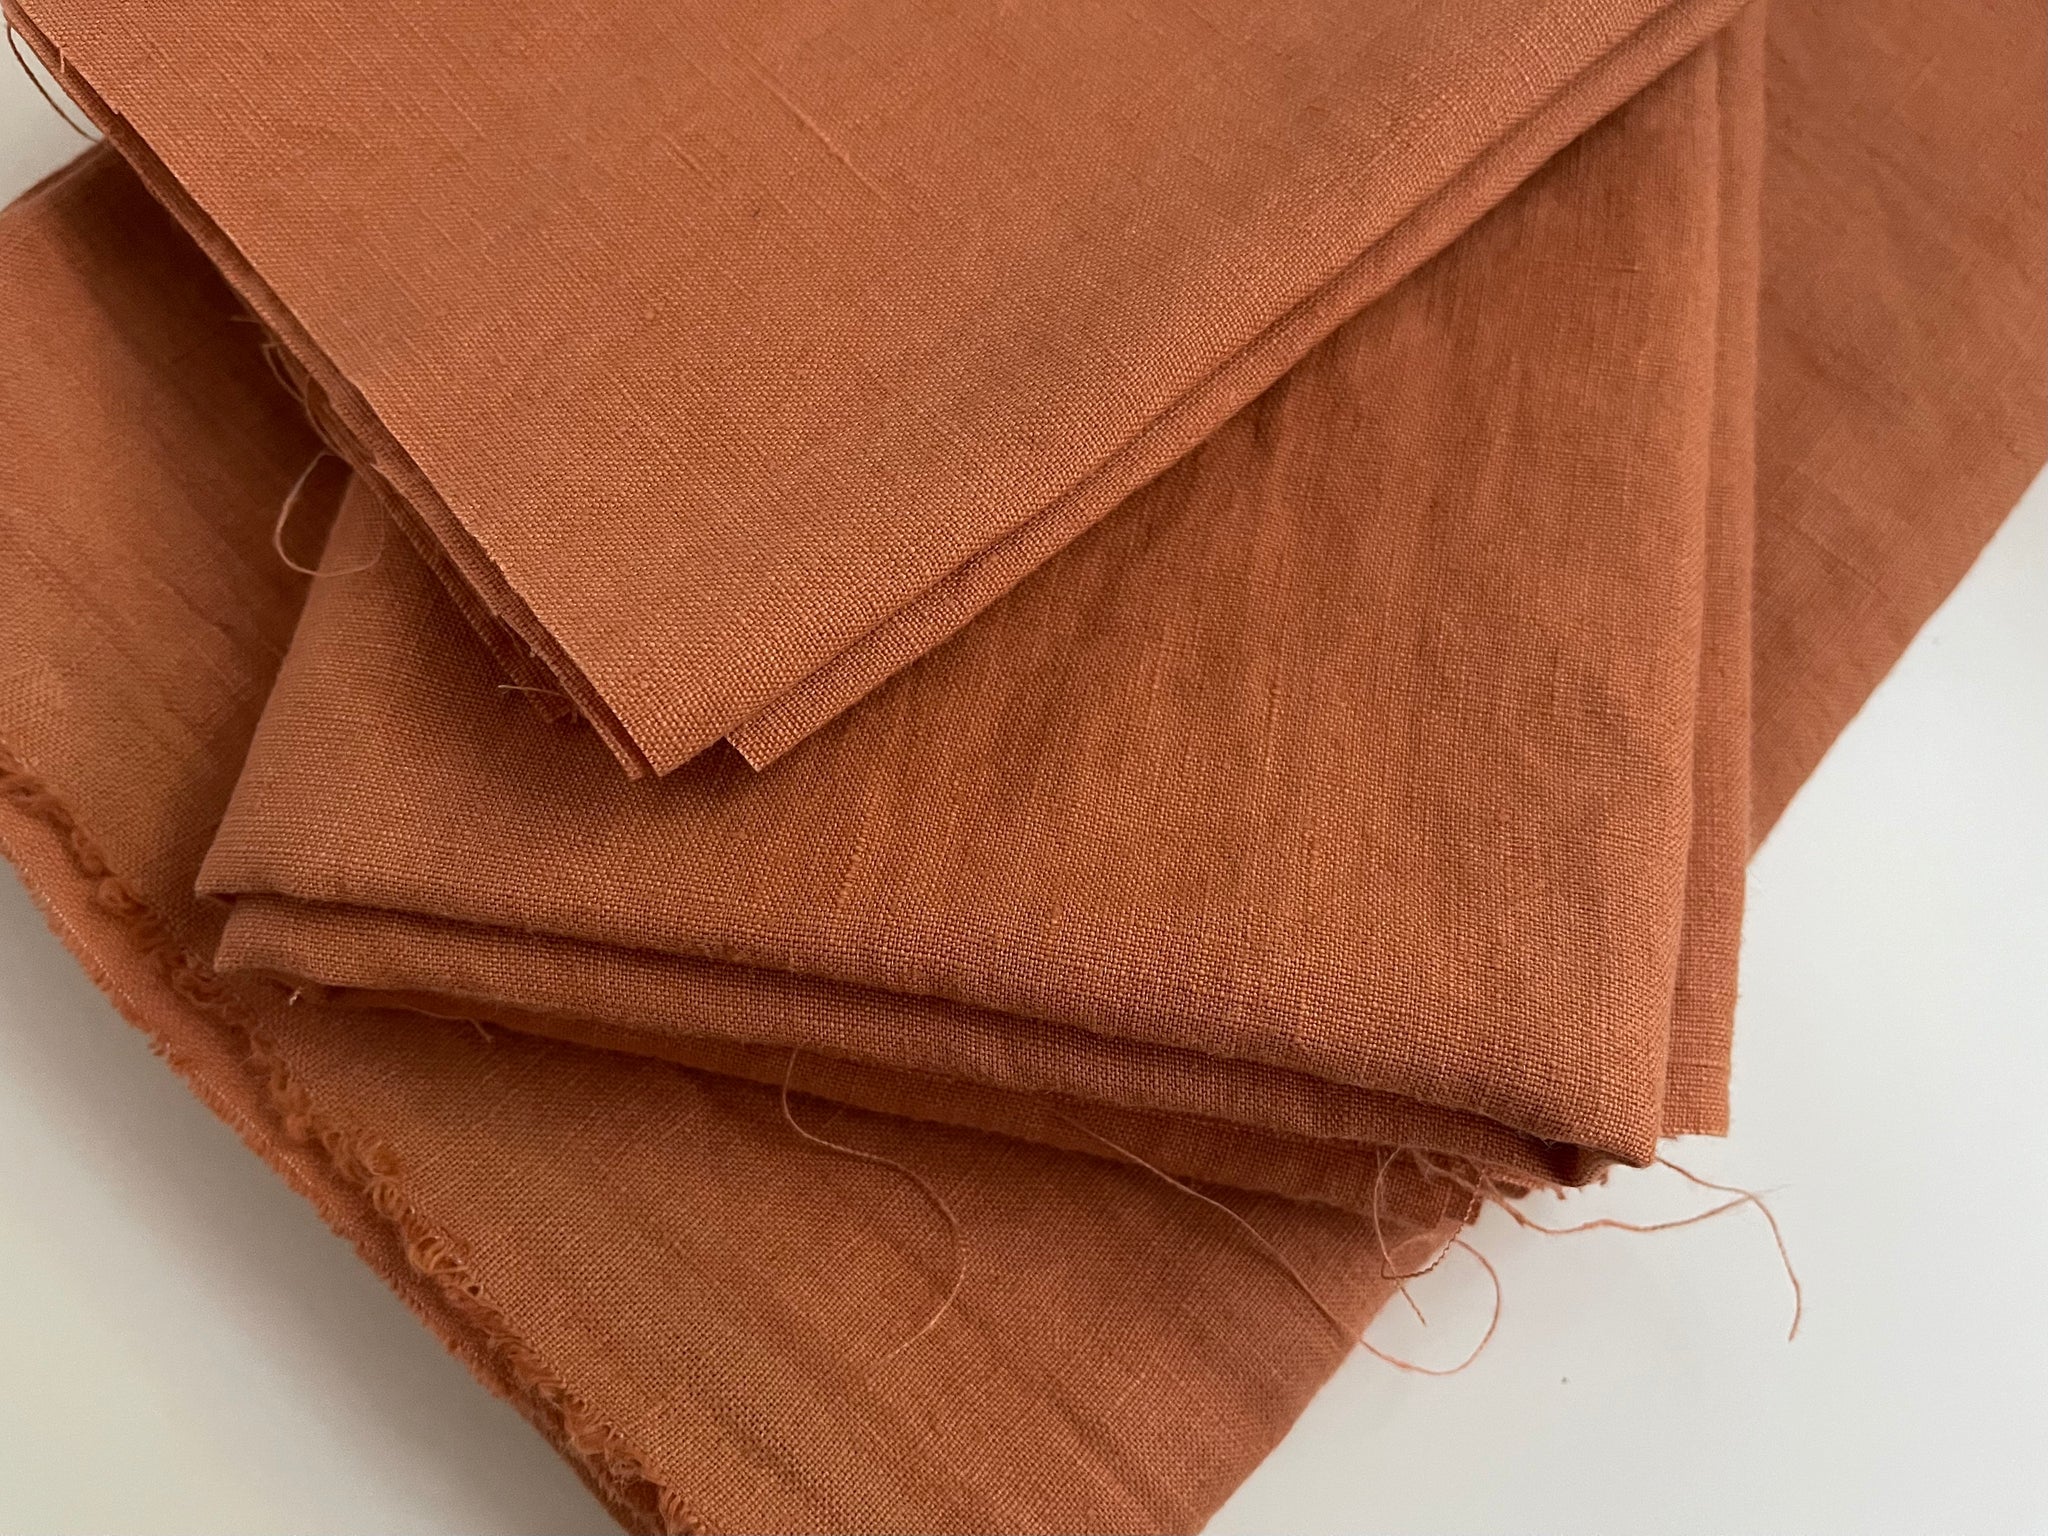 Linen Fabric Remnants - Terracotta - over 2.5 yards